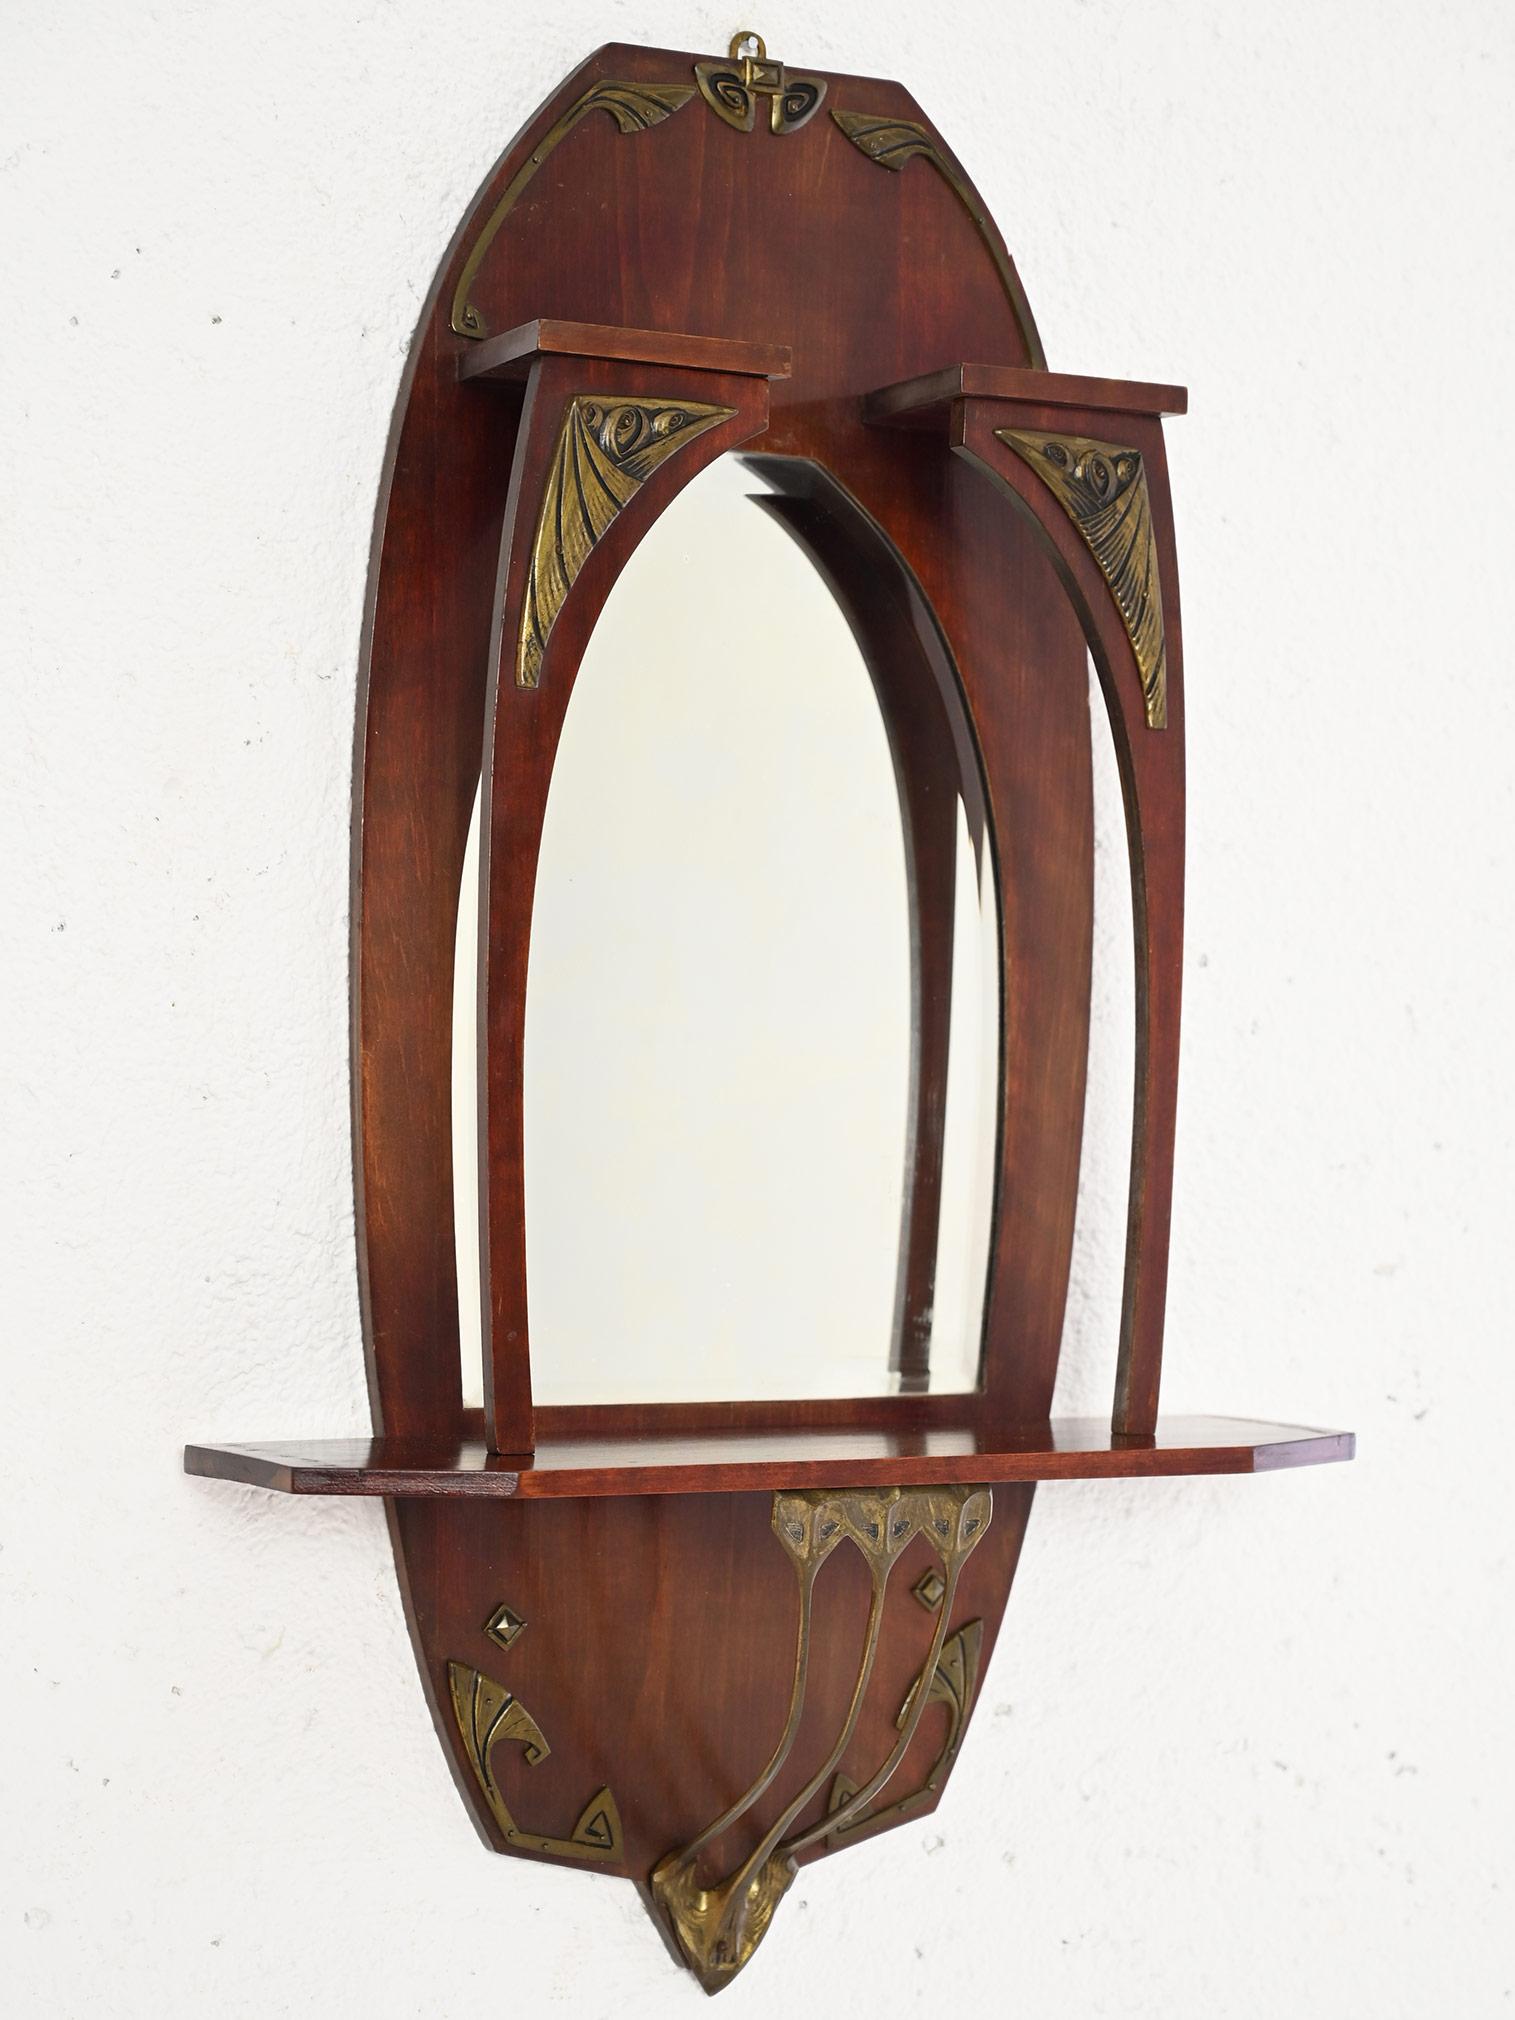 Elegant vintage Scandinavian mirror.

A piece of furniture with a classic and refined taste that is distinguished by the special frame structure that features a small shelf and several brass decorations in art nouveau style.
Due to its small size